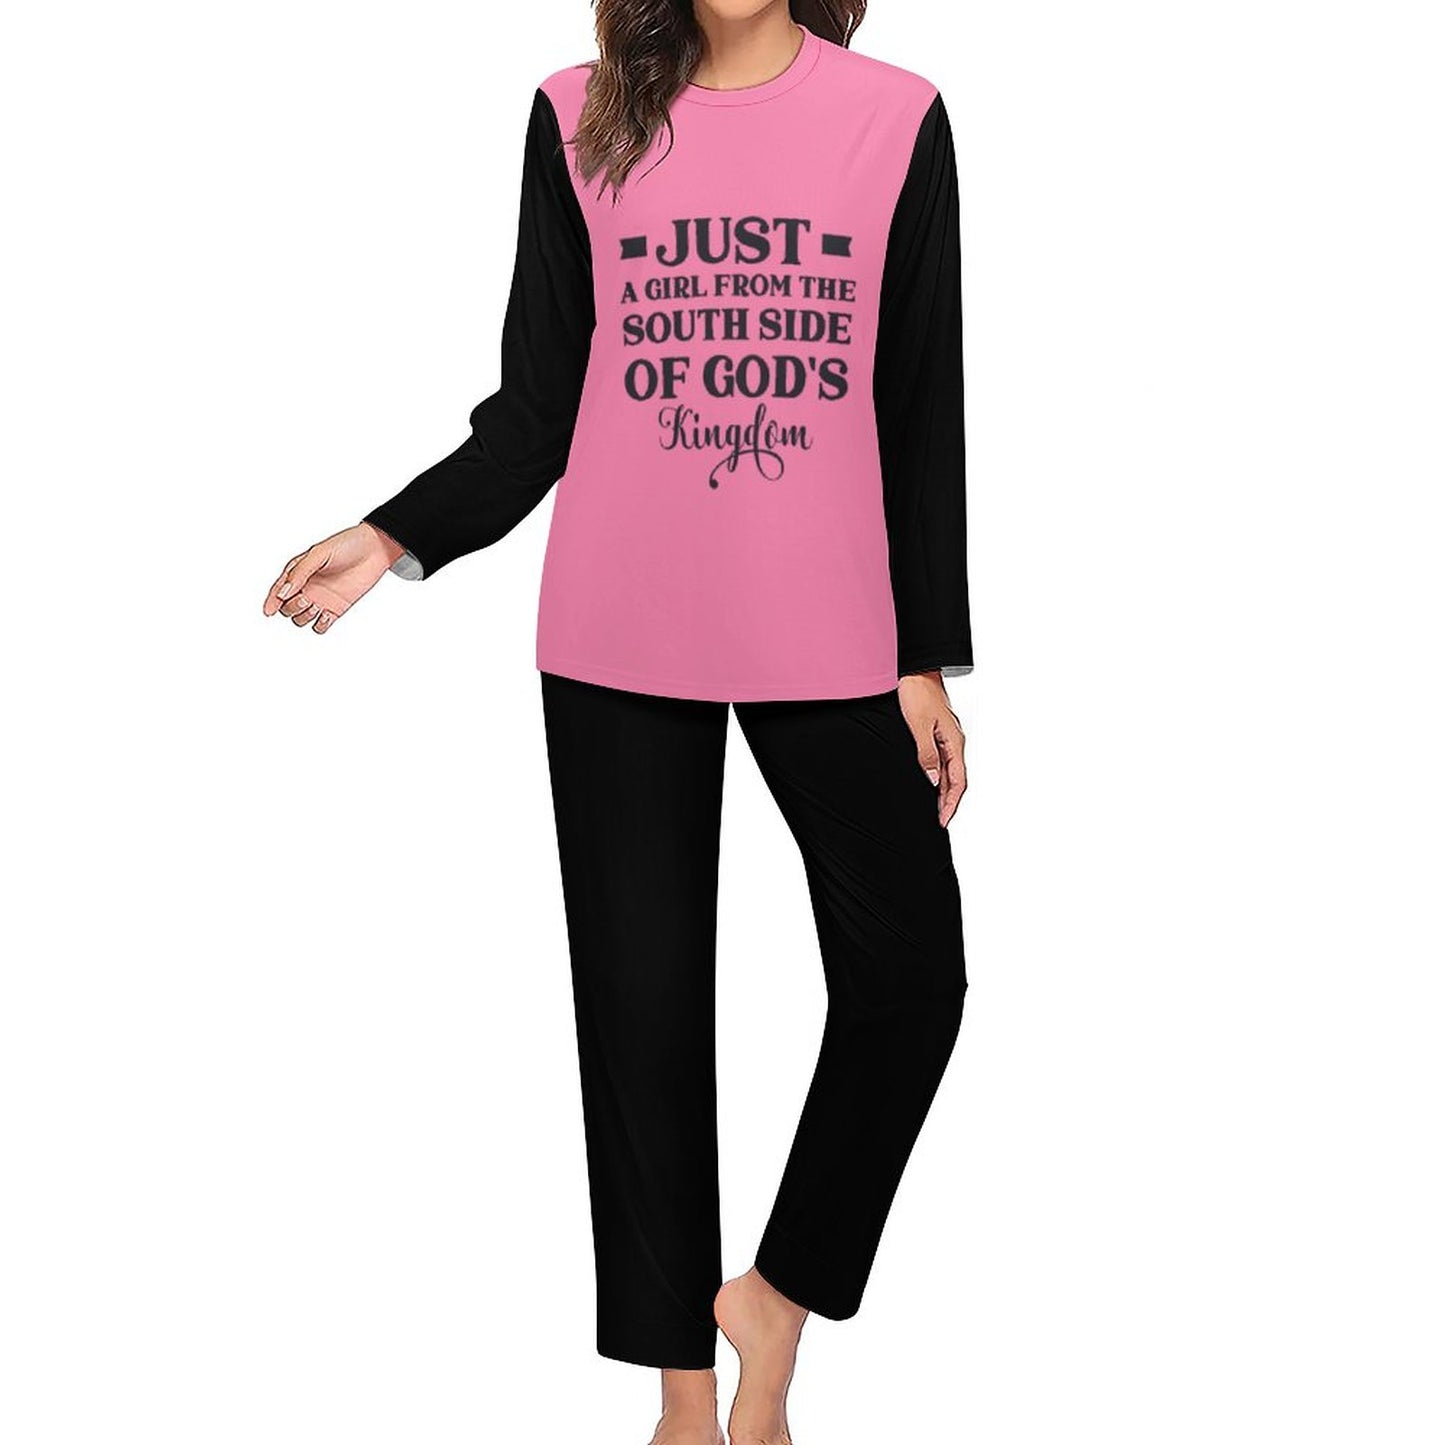 Just A Girl From The South Side Of God's Kingdom Women's Christian Pajamas